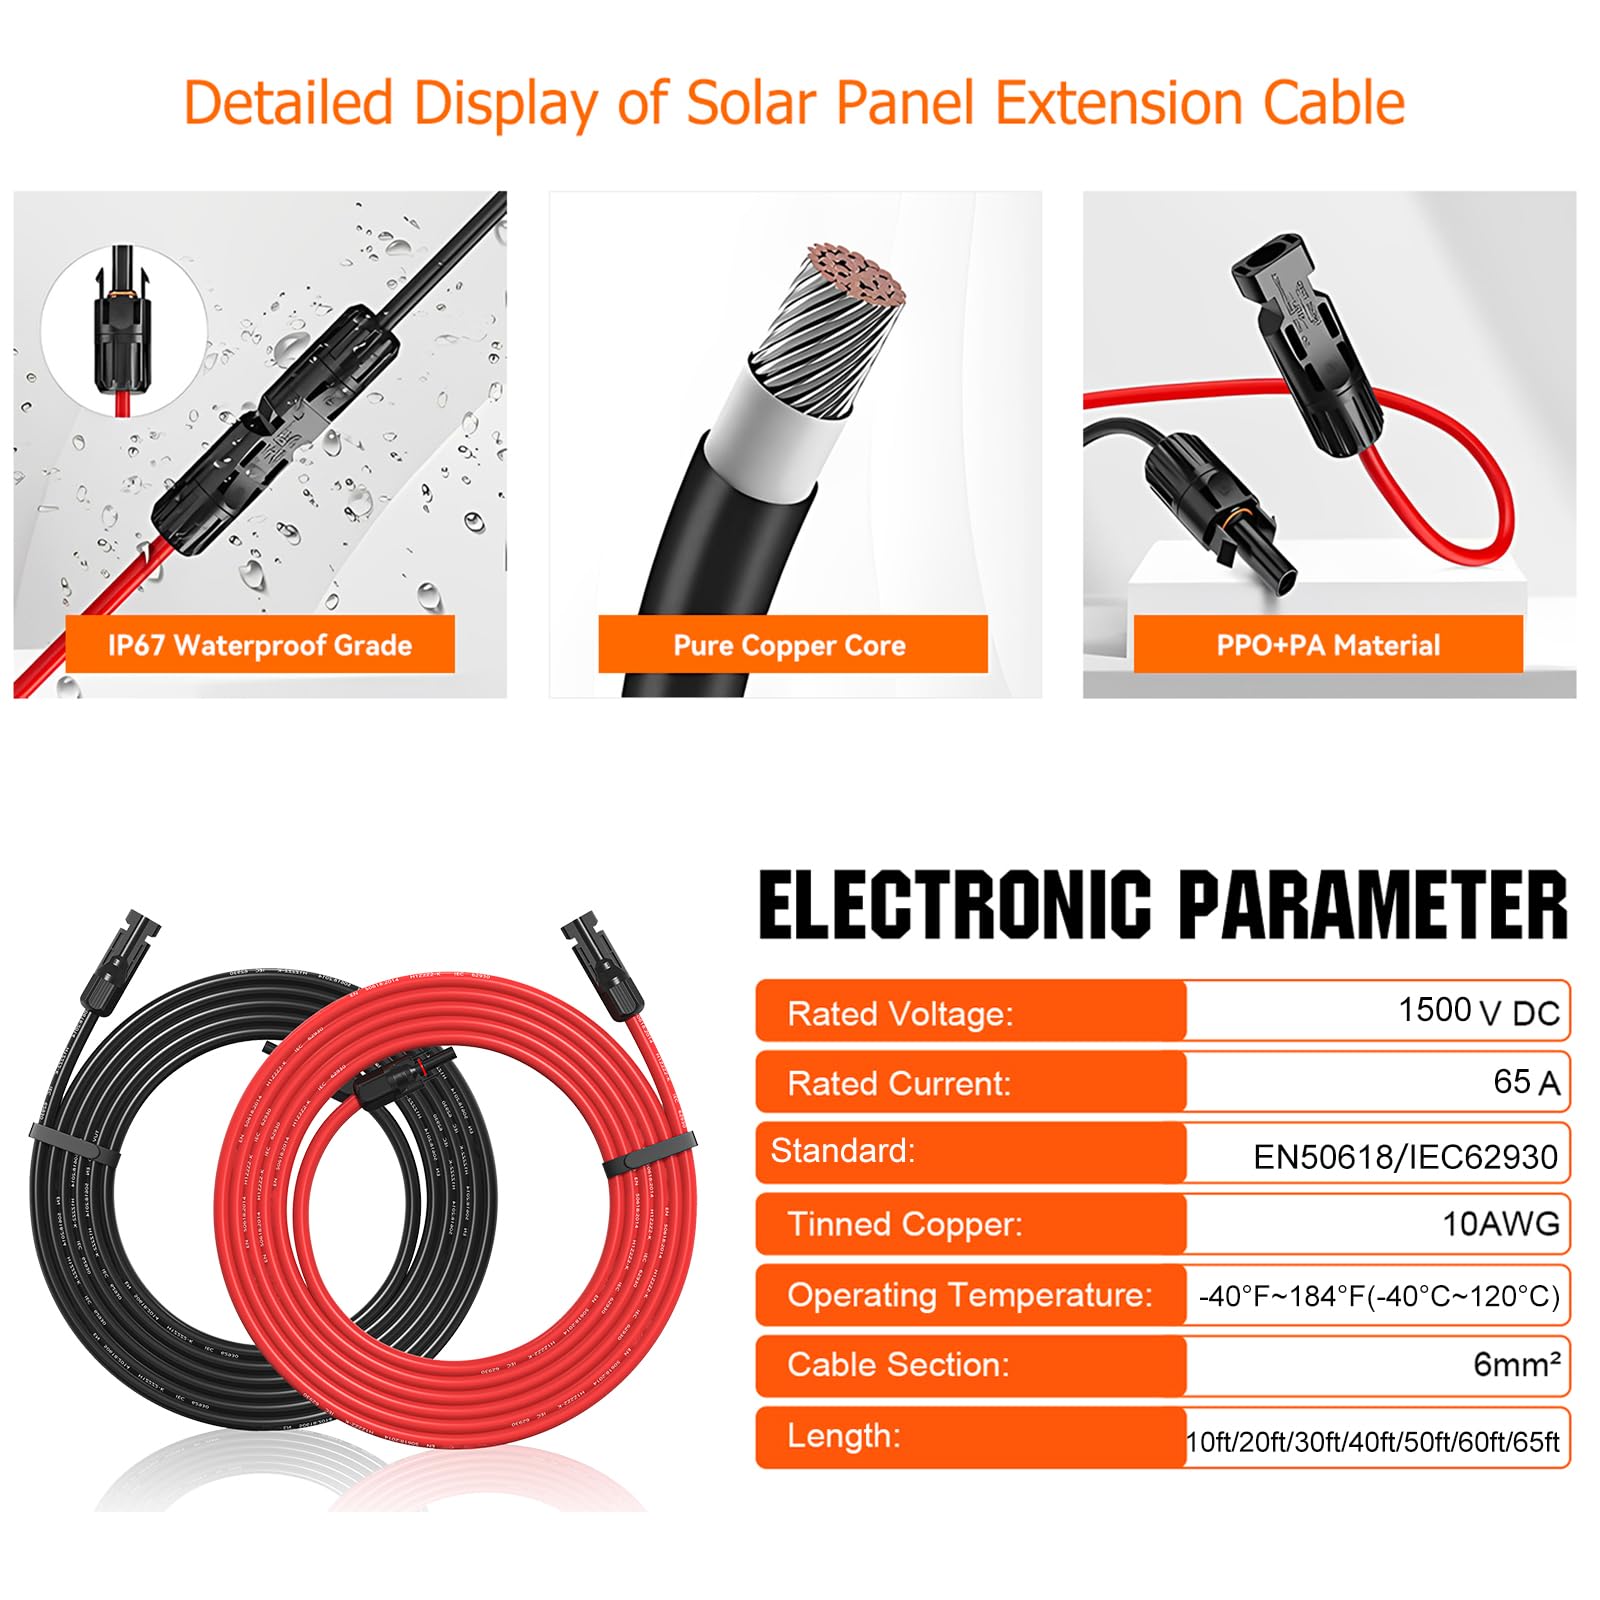 10AWG Solar Extension Cable 50Ft, 10 Gauge Solar Panle Extension Cables Wire 50 Feet with Female and Male Solar Connector Adapter Kit (Red&Black)